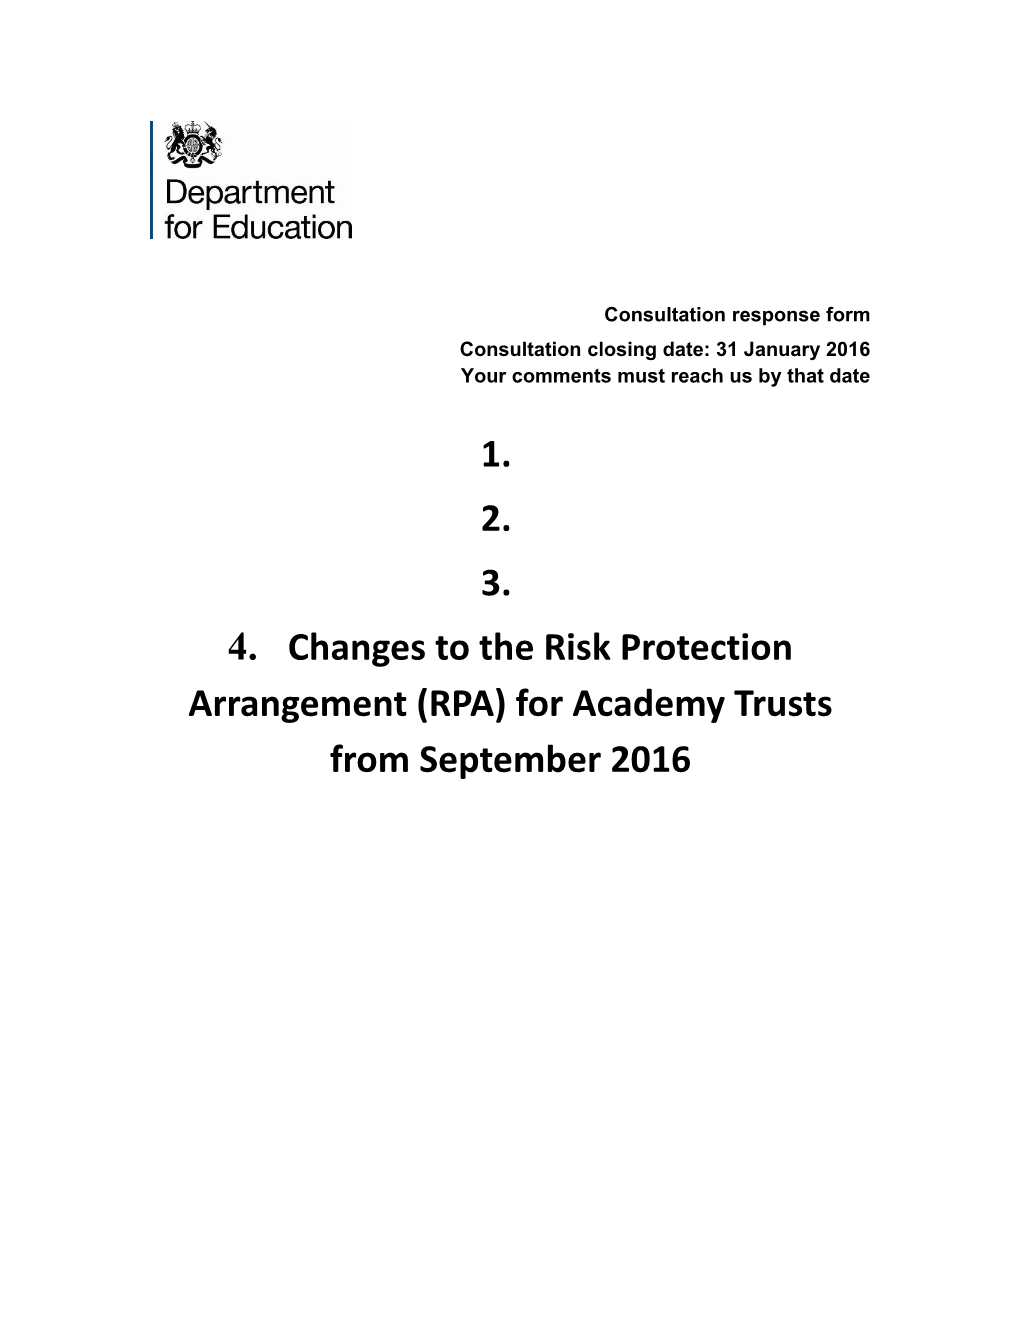 Changes to the Risk Protection Arrangement (RPA) for Academy Trusts from September 2016